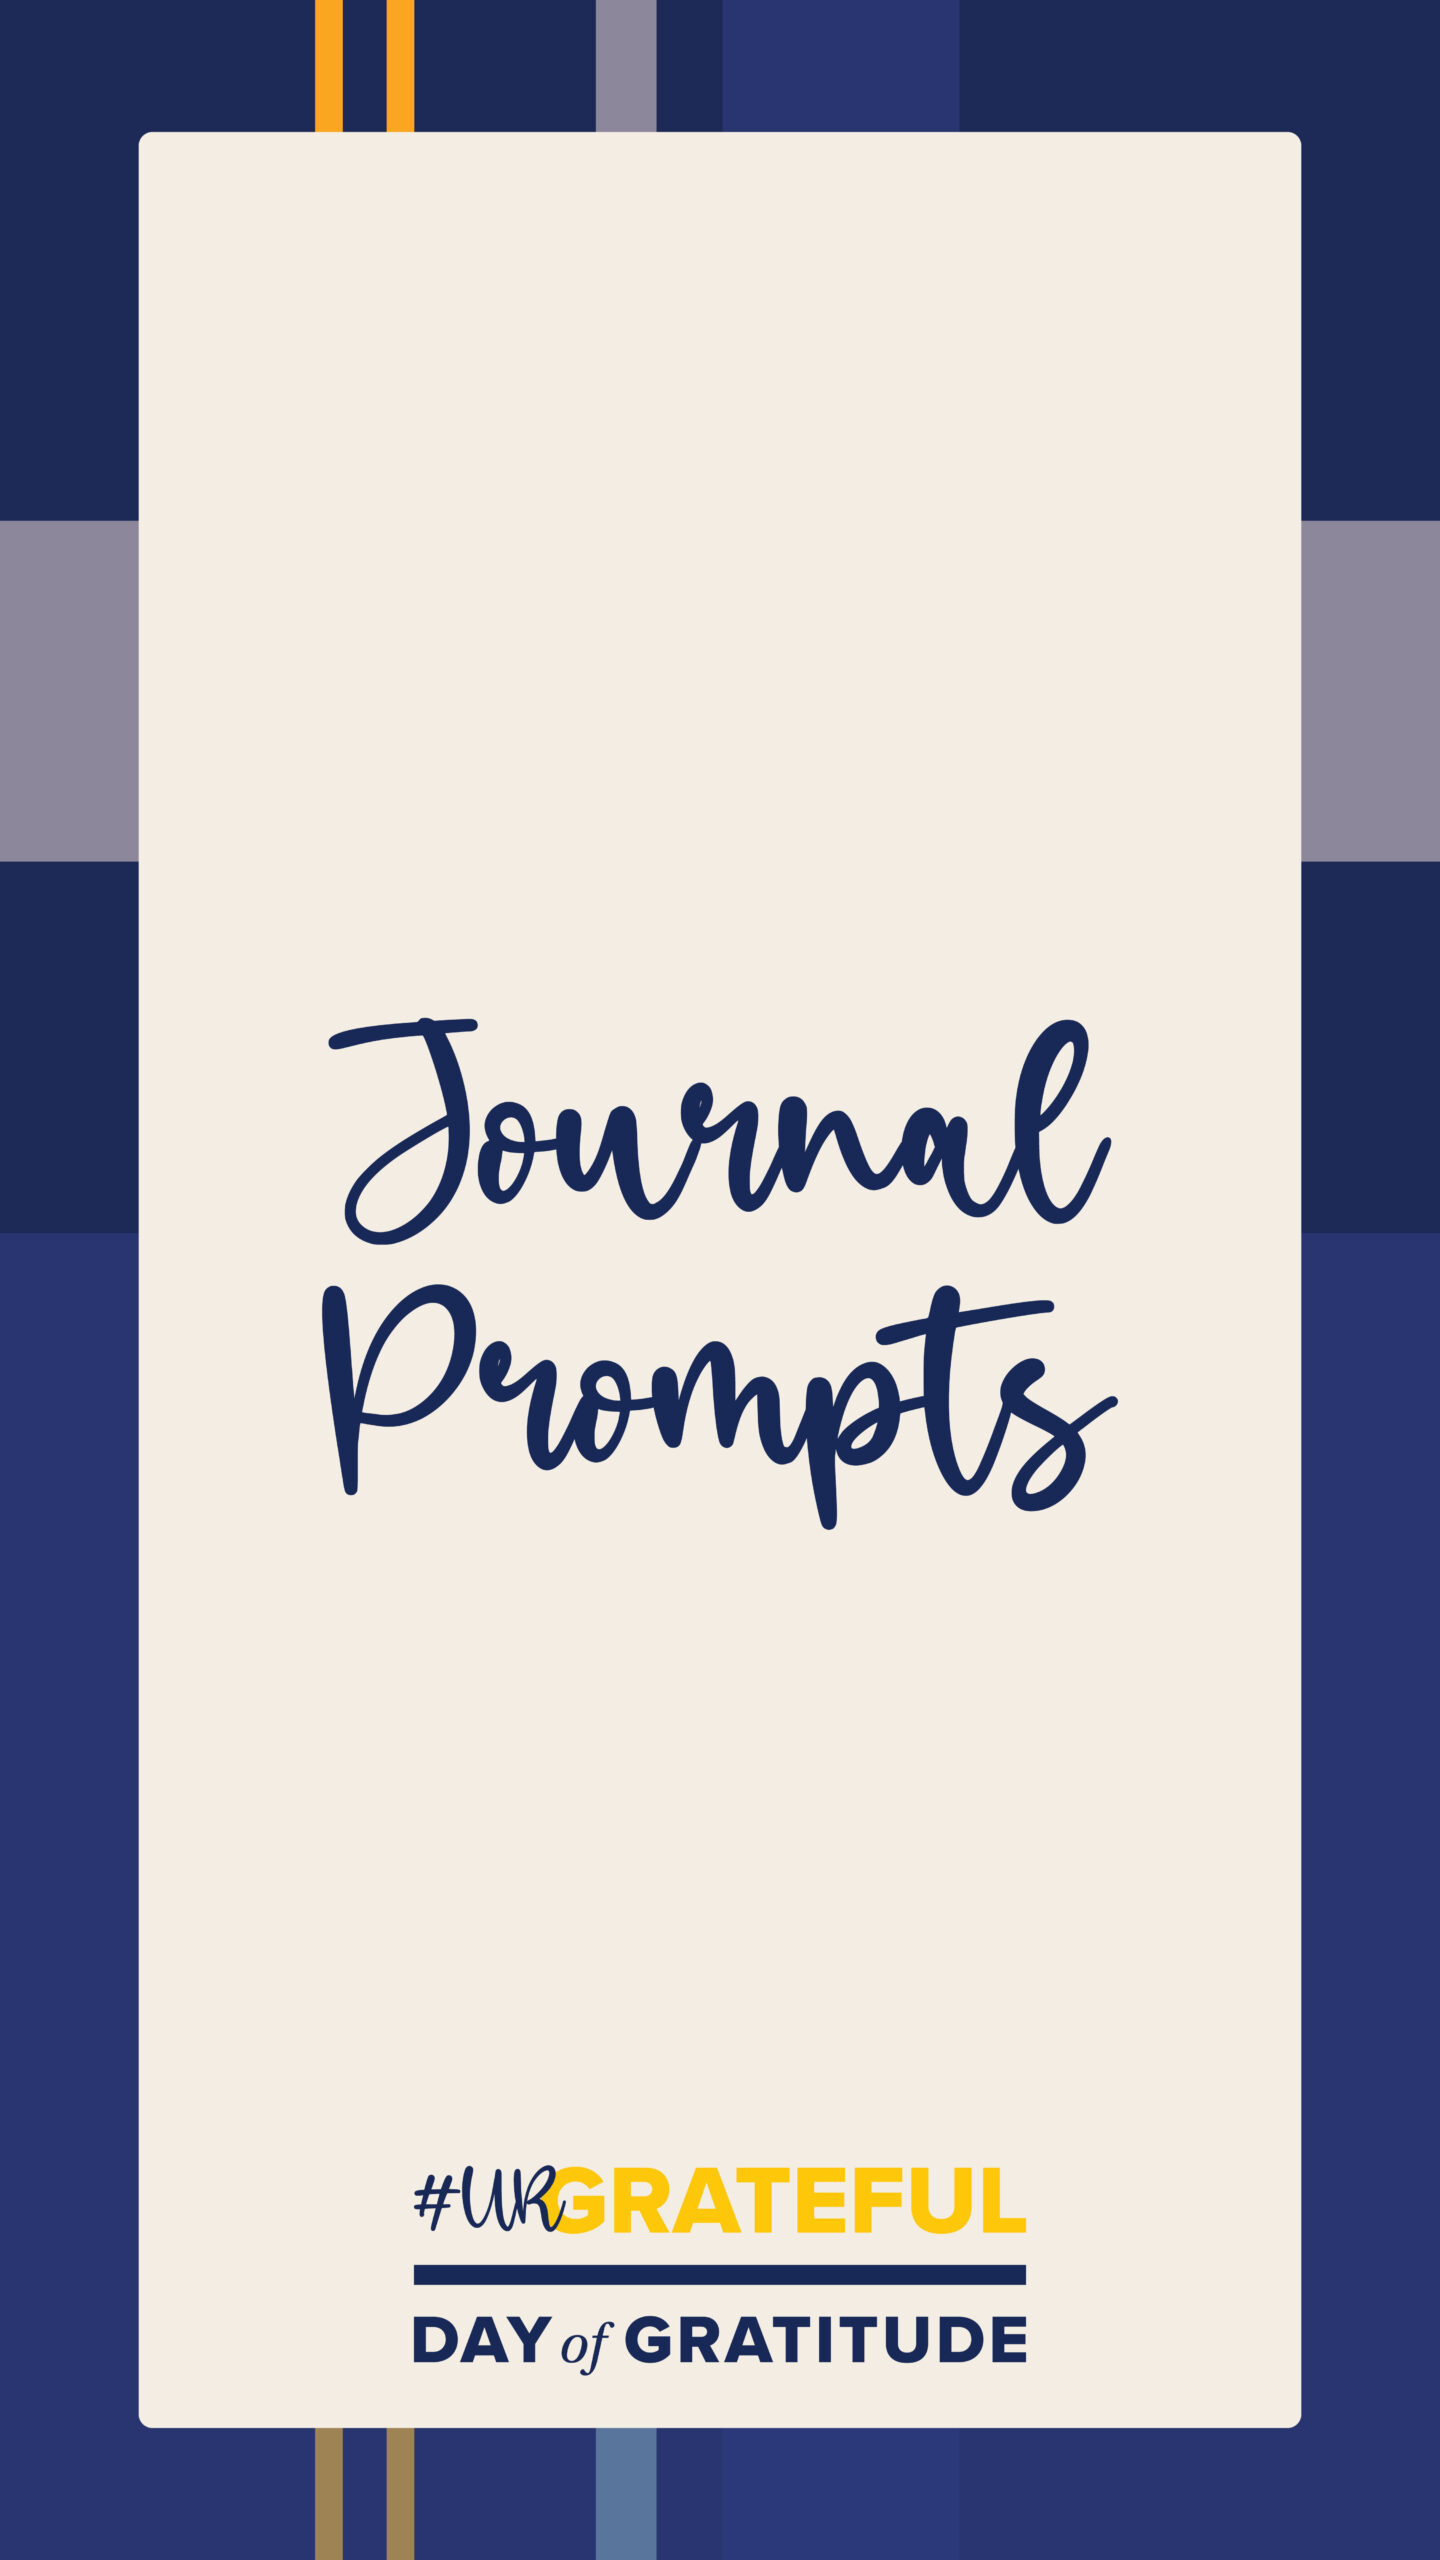 Journal Prompts graphics